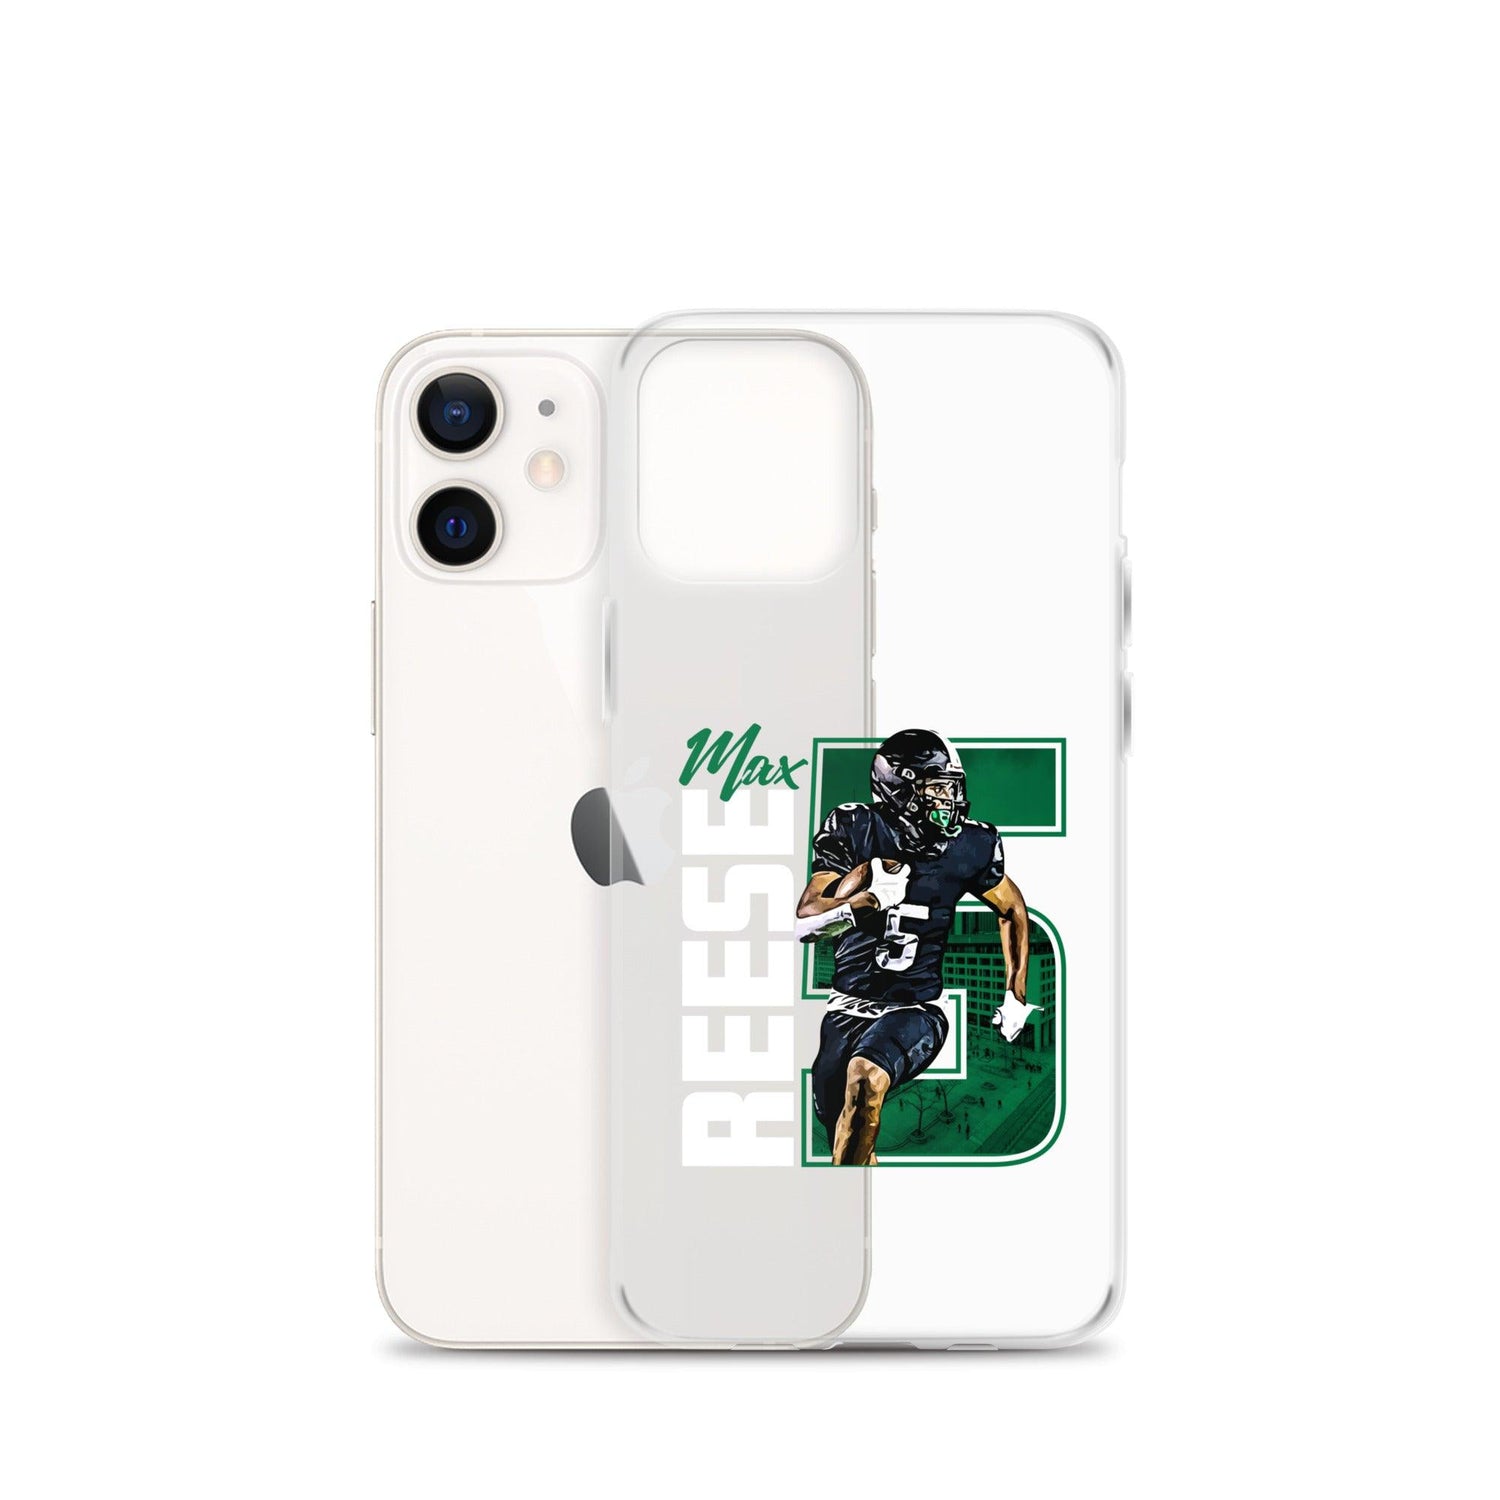 Max Reese "Gameday" iPhone® - Fan Arch